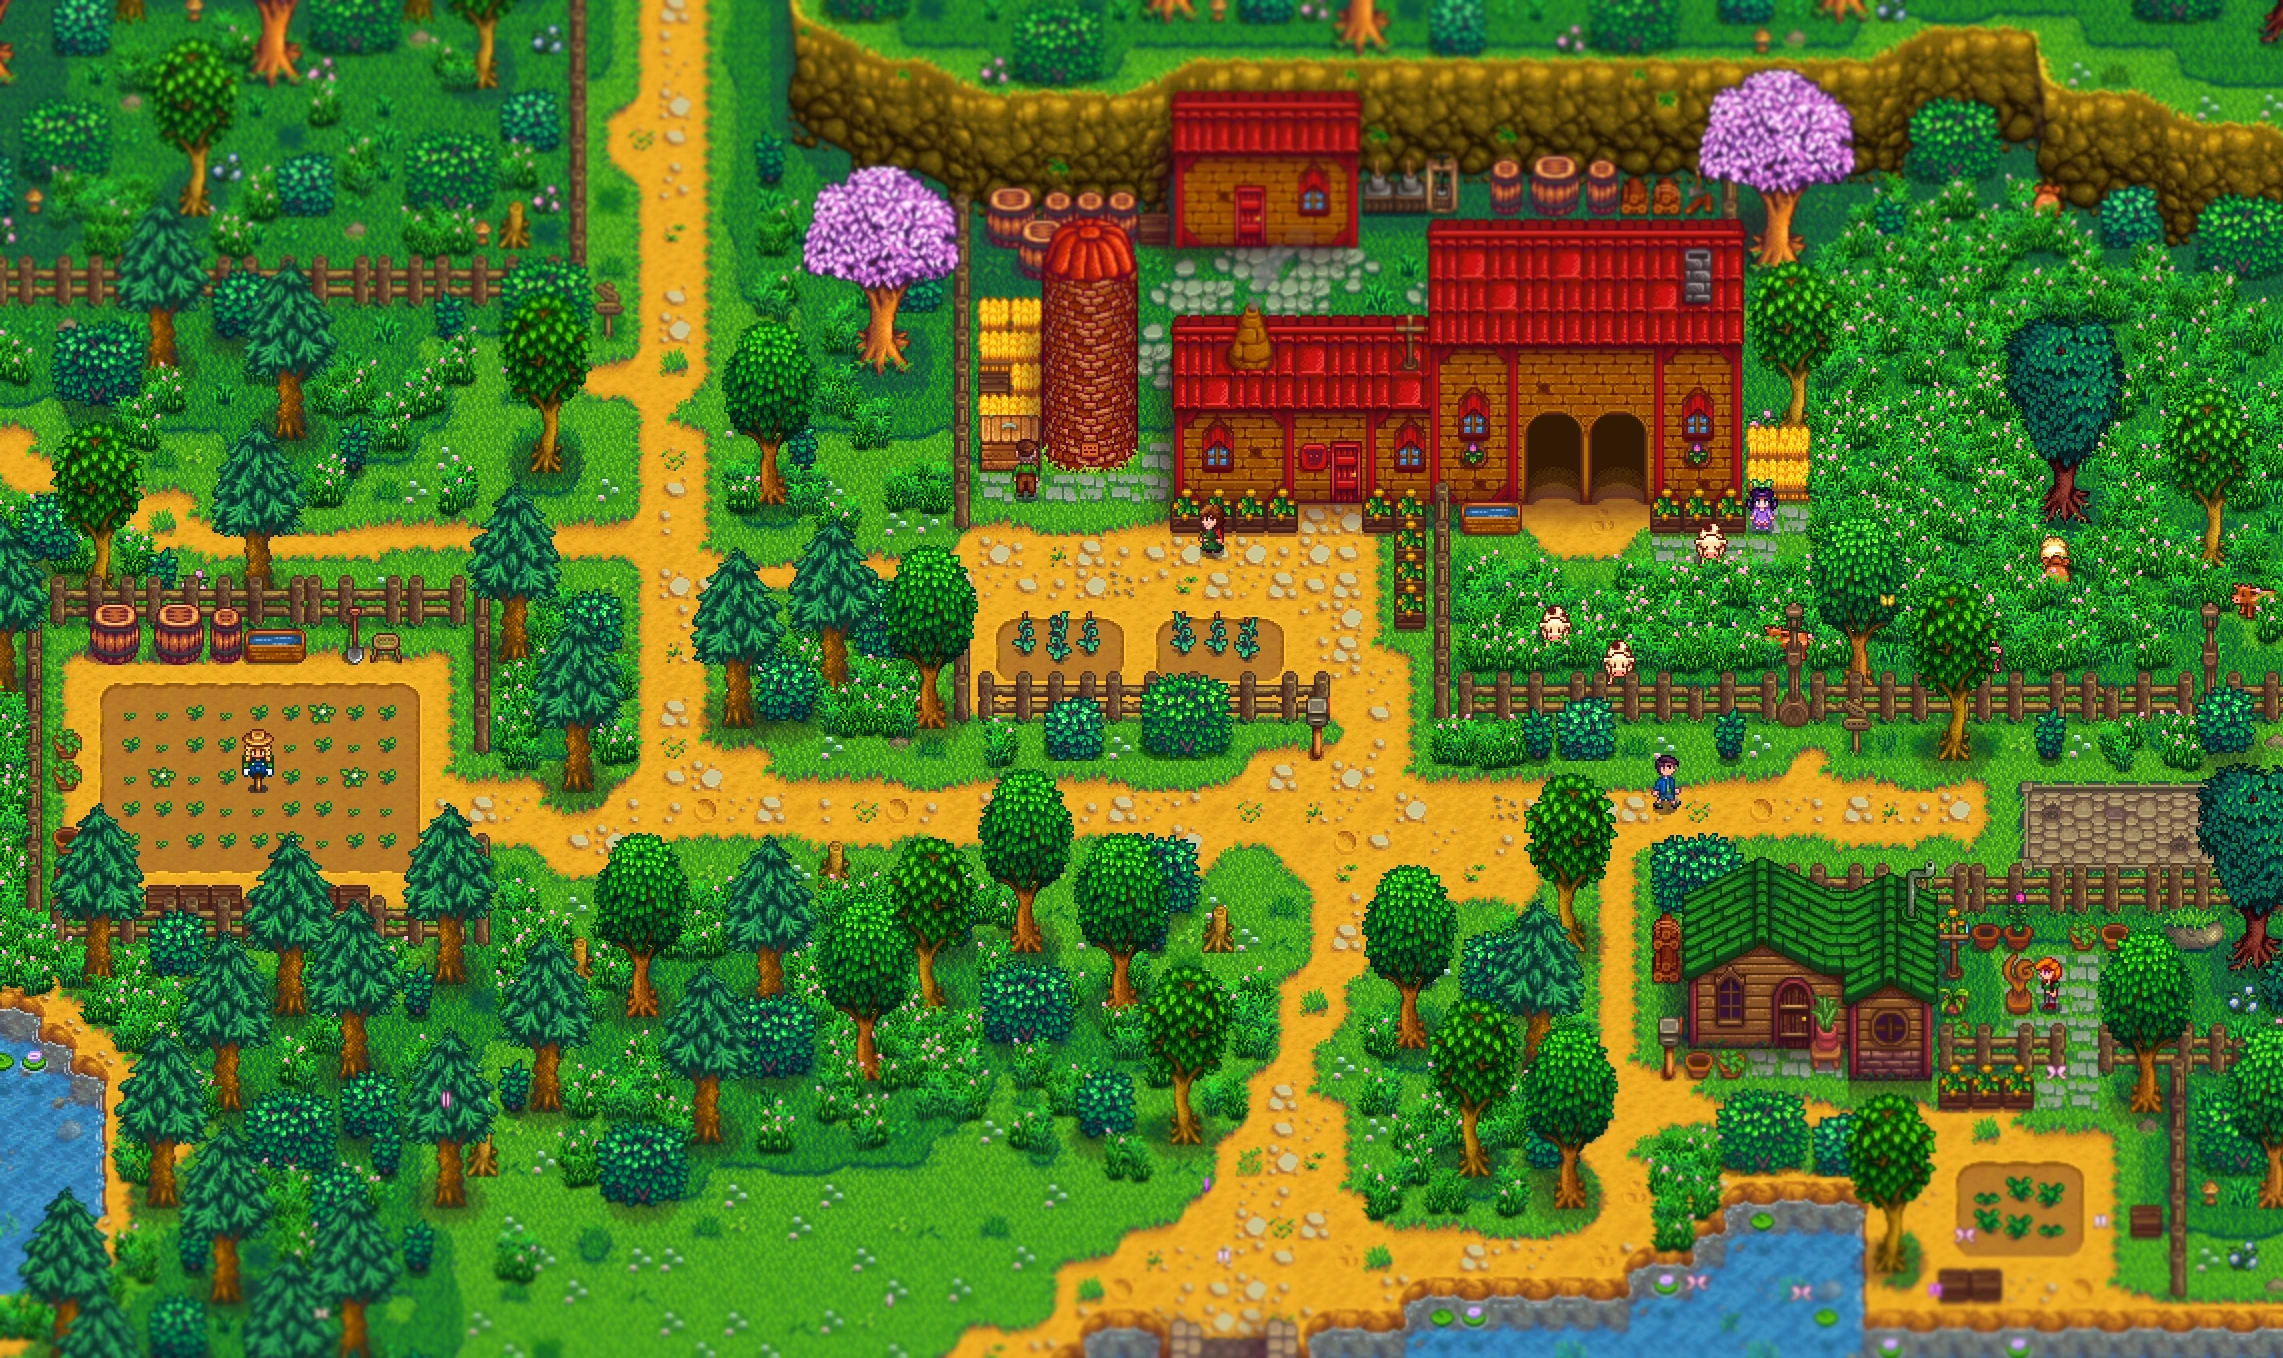 New content being played through the Stardew Valley Expanded mod.